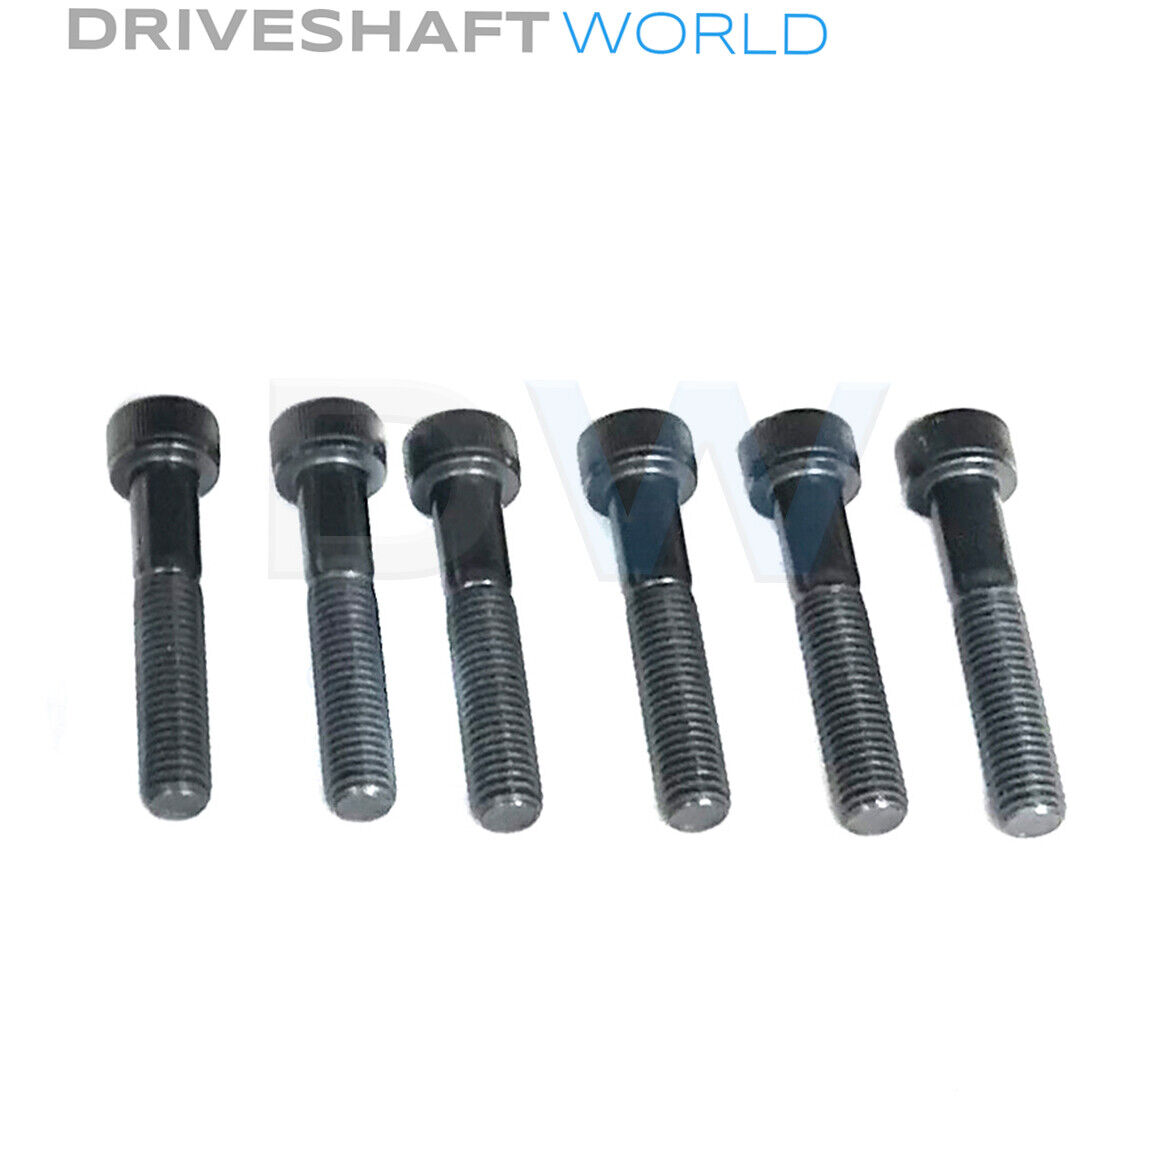 Jeep Liberty 2002-2007 Front Driveshaft CV Joint Bolts - Diff Side x6